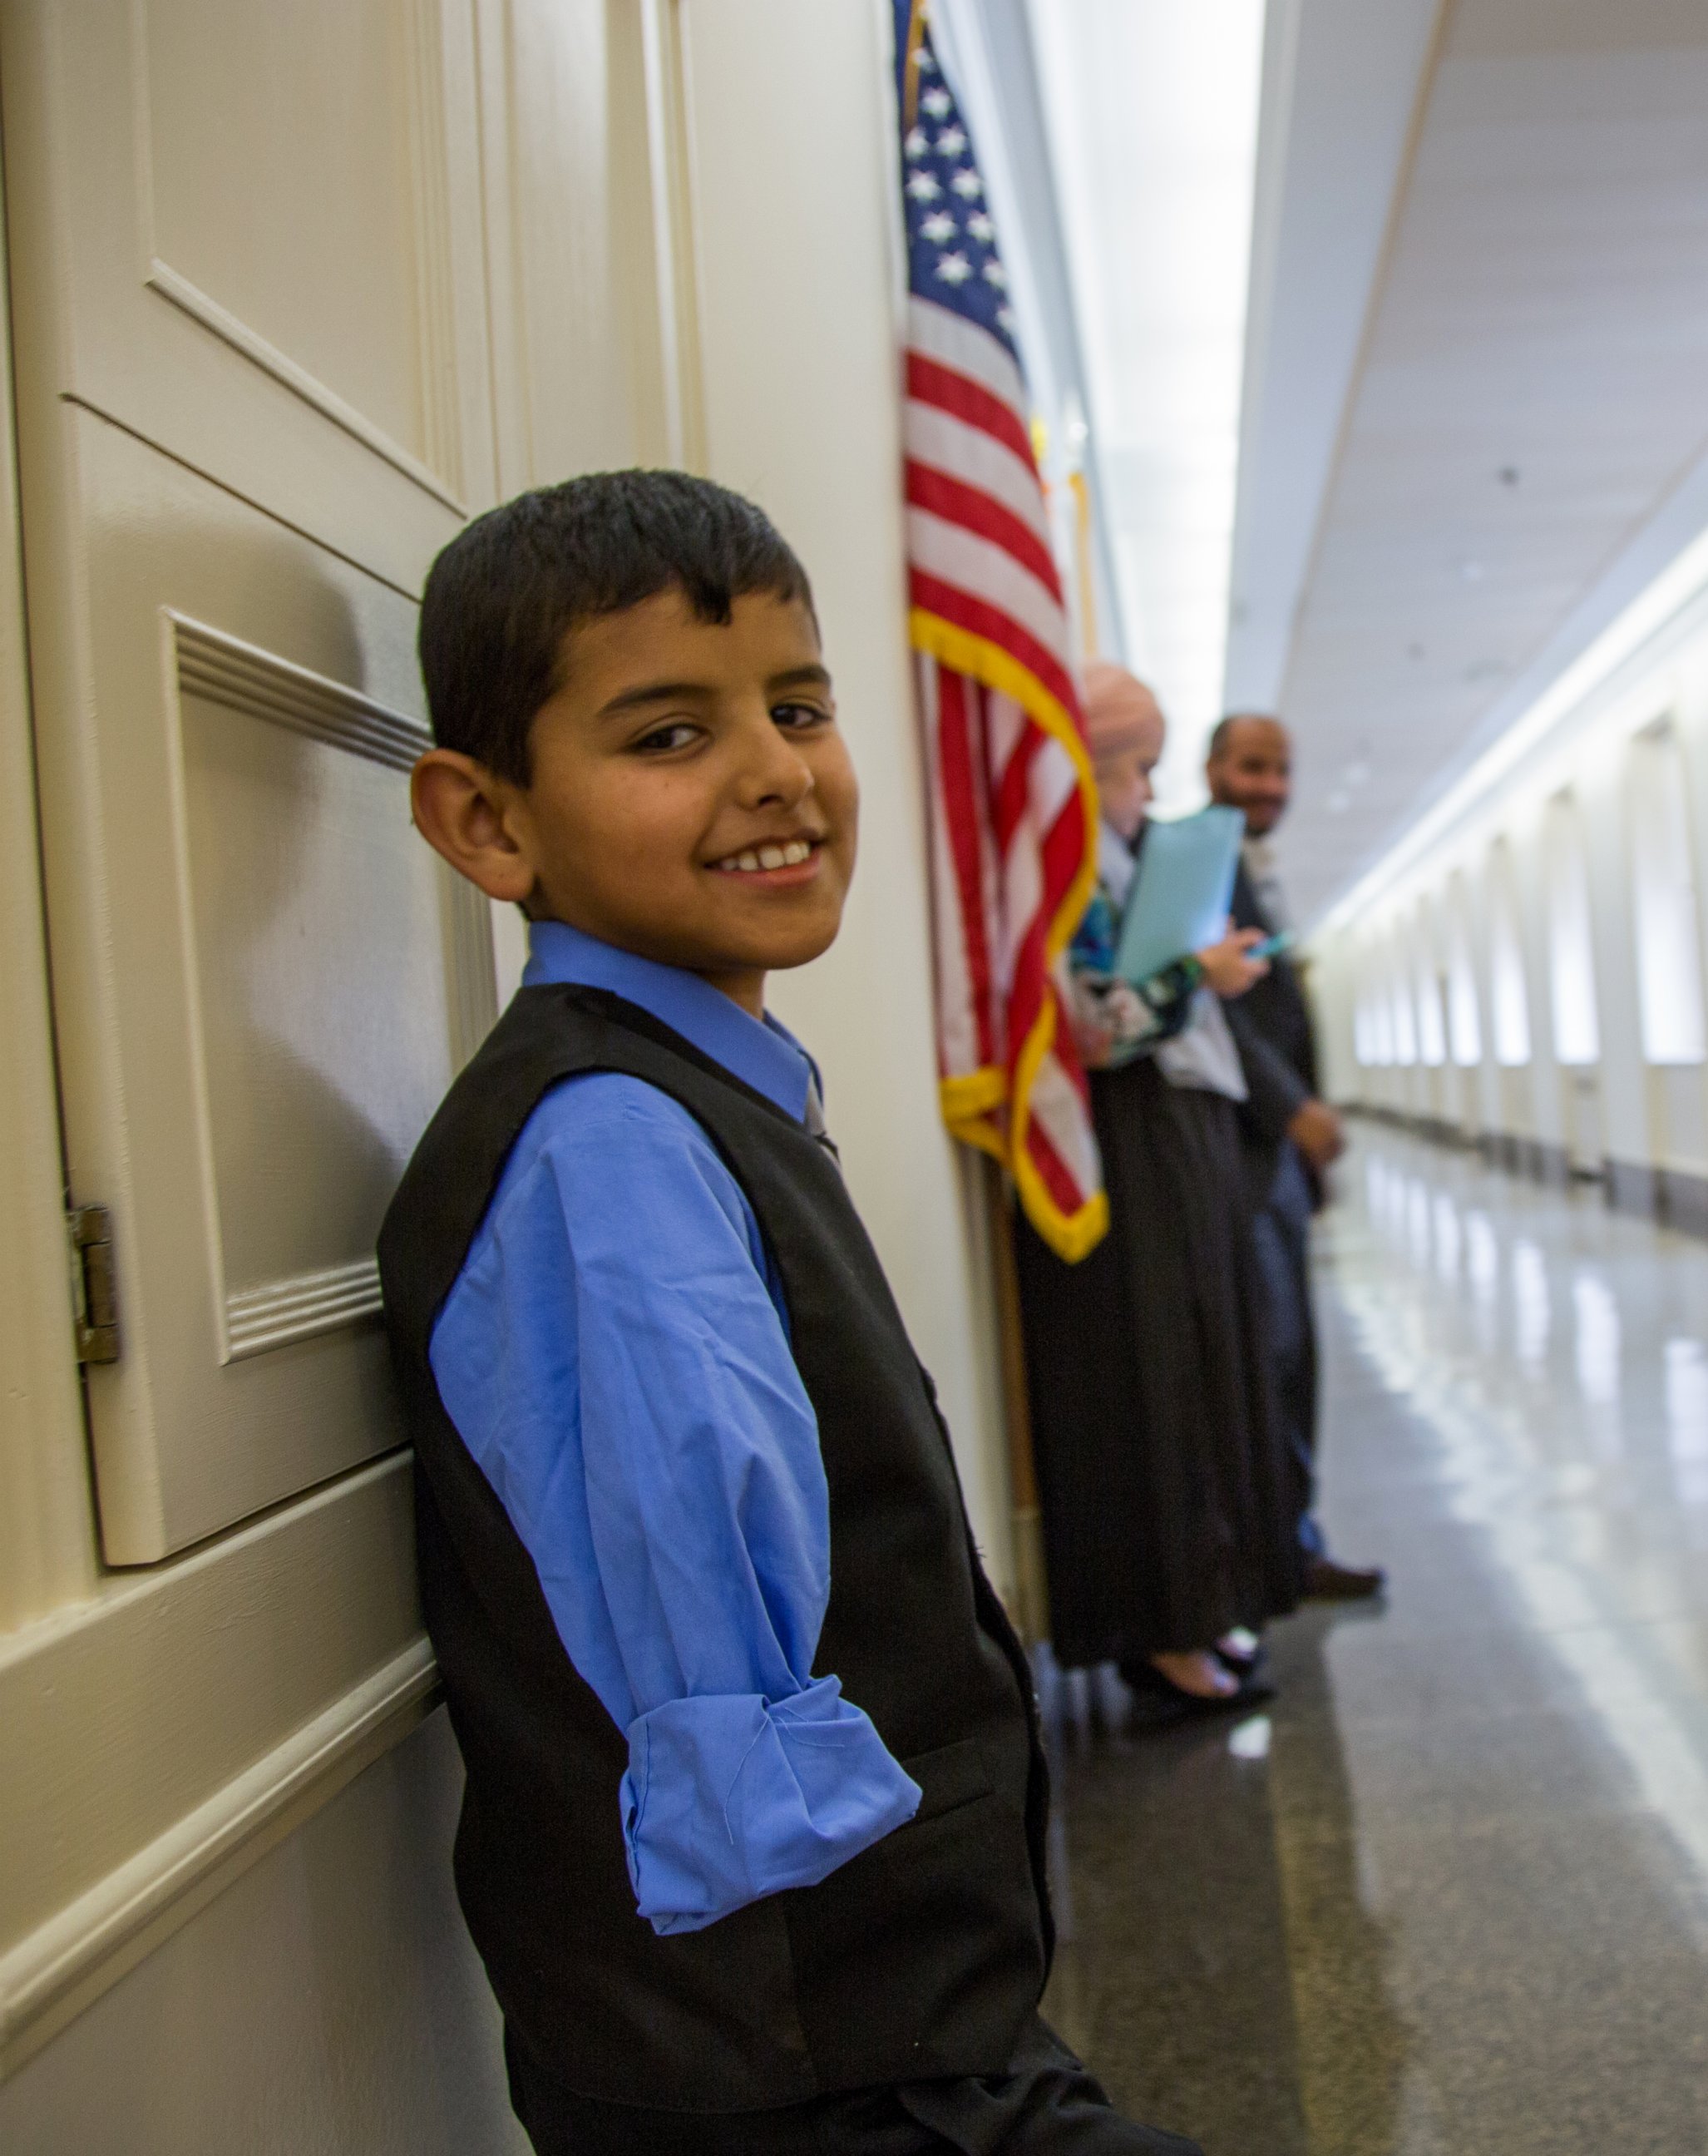 PHOTO: Ahmad Alkhalaf, 9, lost both of his arms after an airstrike hit his Syrian refugee camp. He is Congressman Seth Moulton's guest for the State of the Union. 